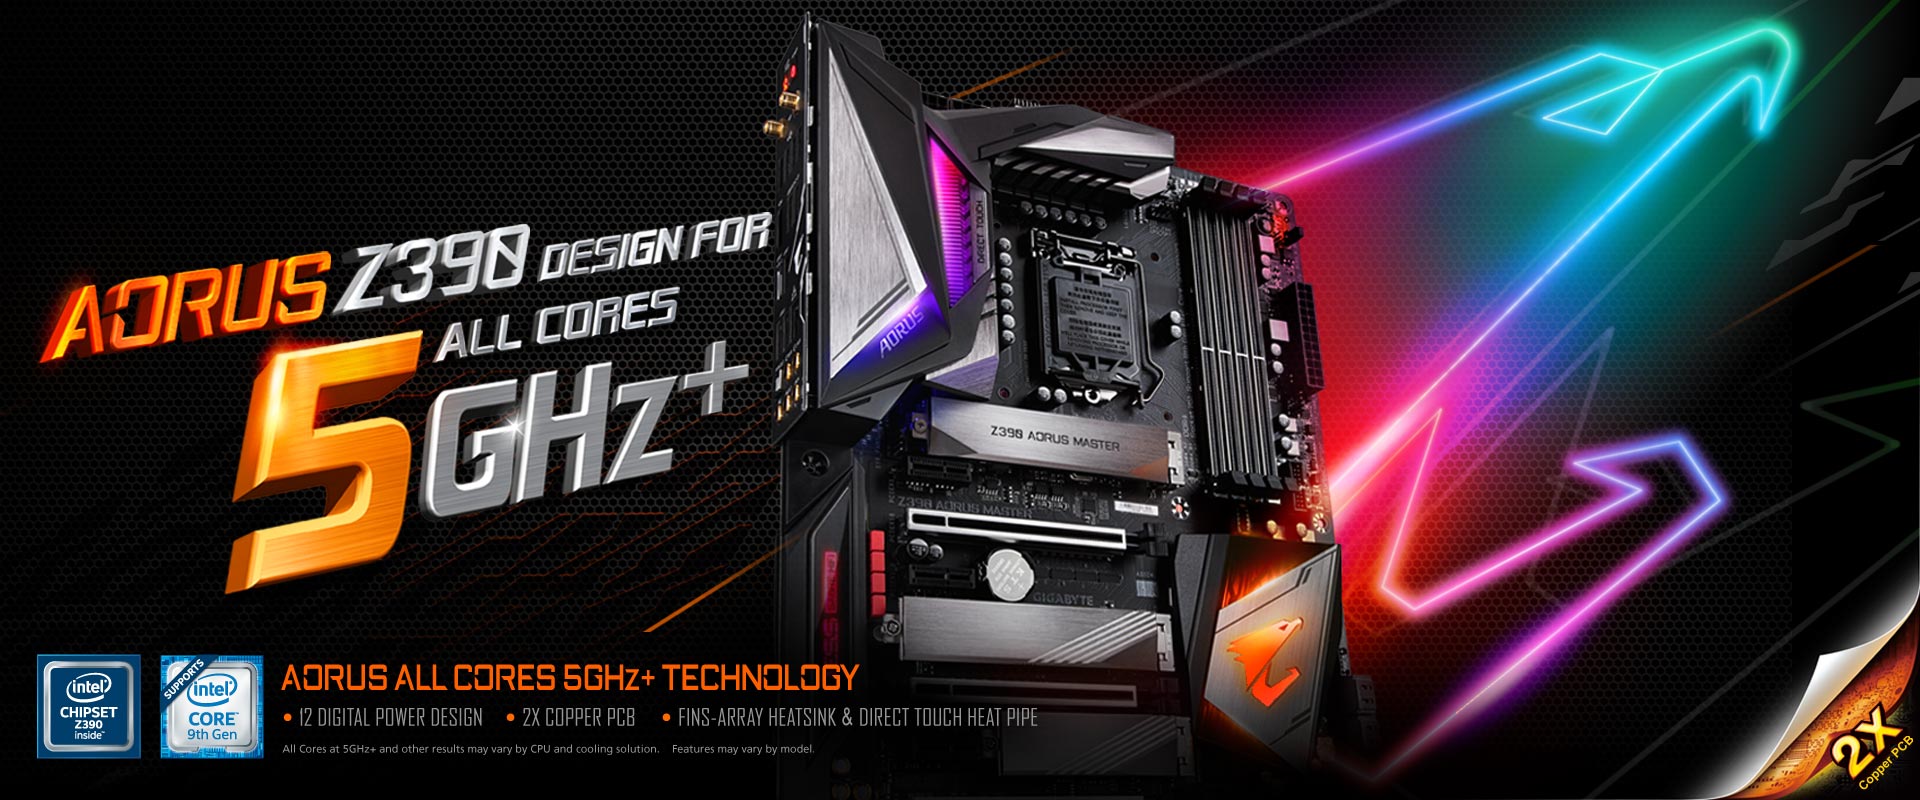 AORUS Z390 Motherboard Banner Showing the Product Intel Core Badges and Text That Reads: DESIGN FOR ALL CORE 5GHz+ - AORUS ALL CORES 5GHz + Technology - 12 Digital Power Design - 2X Cooper PCB - Fins-Array Heatsink & Direct Touch Heat Pipe - All cores at 5GHz+ and other results may vary by CPU and cooling solution. Features may vary by model.